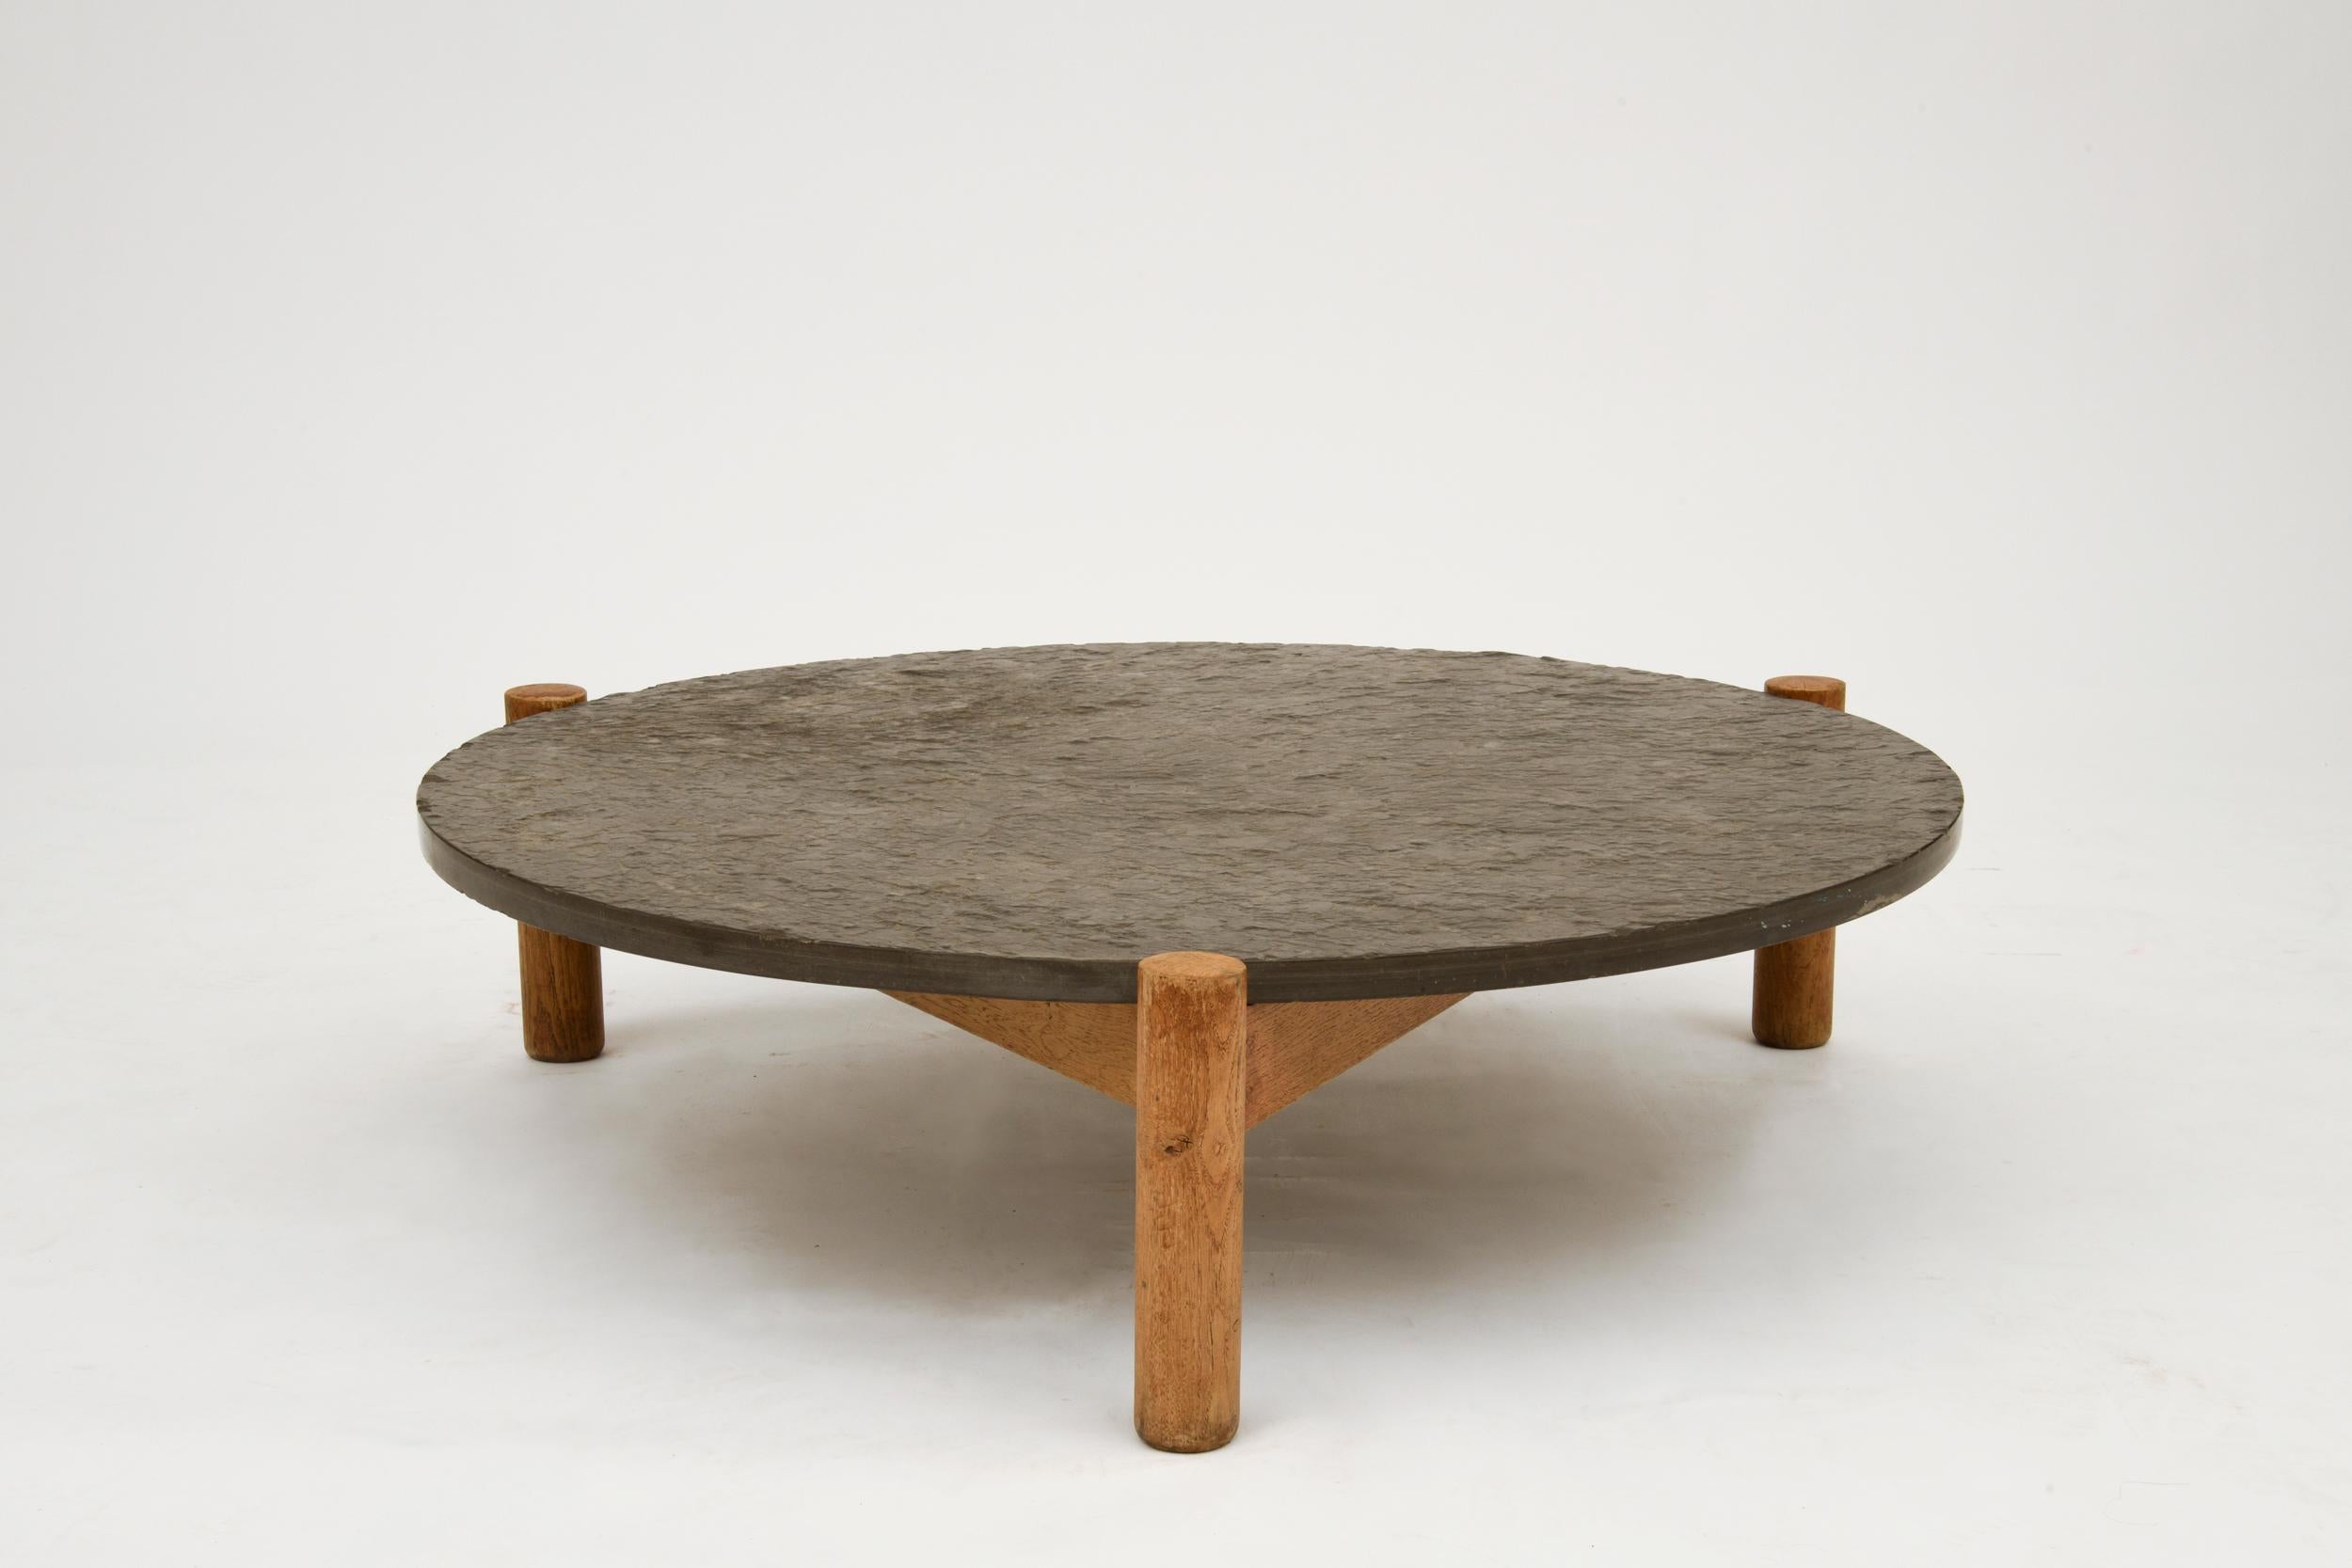 Oak and slate coffee table by Charlotte Perriand, circa 1950.
Beautiful example of Perriand's timeless design, the coffee table is in great condition.